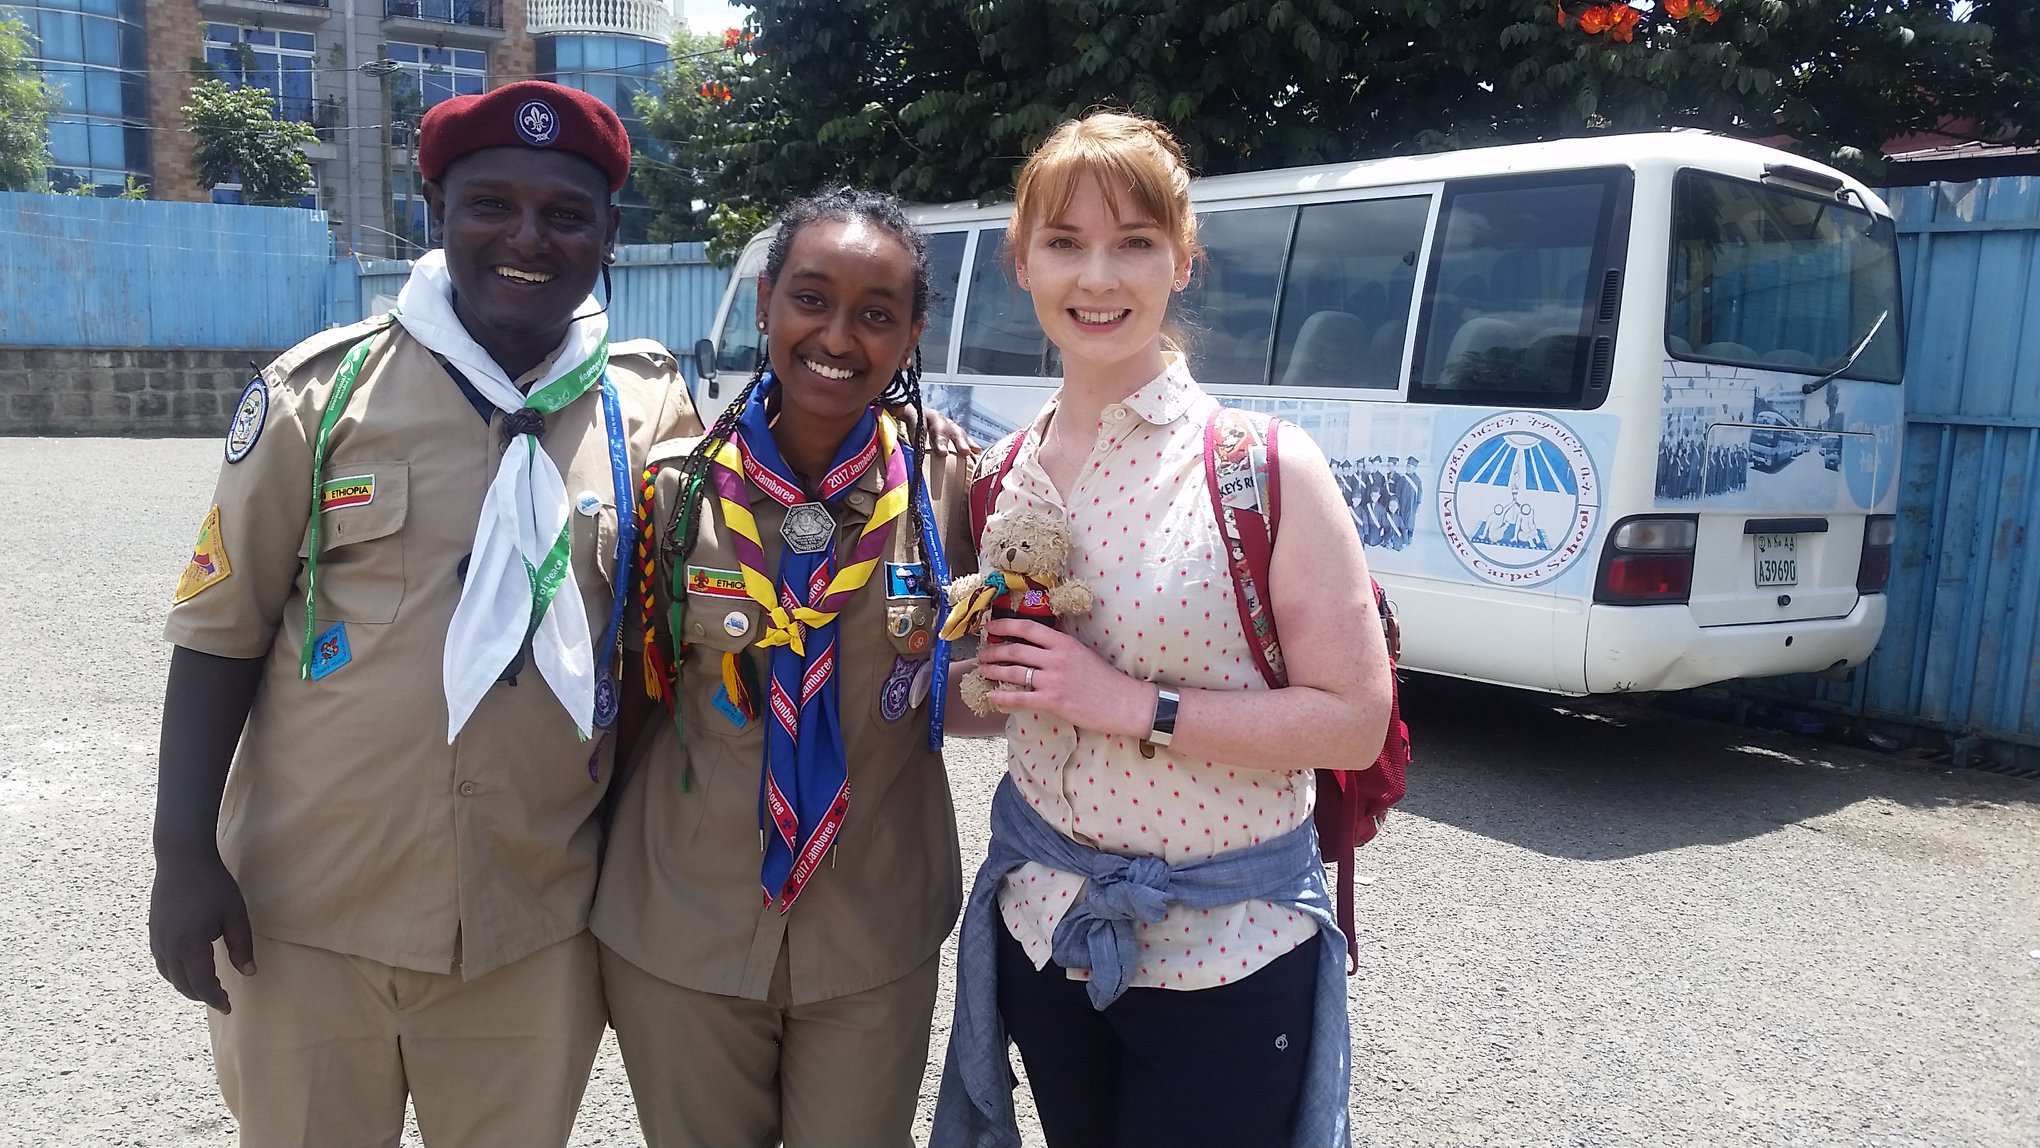 Saron Gebre in her scout uniform, standing alongside two other scouts from Ethiopia and Scotland.